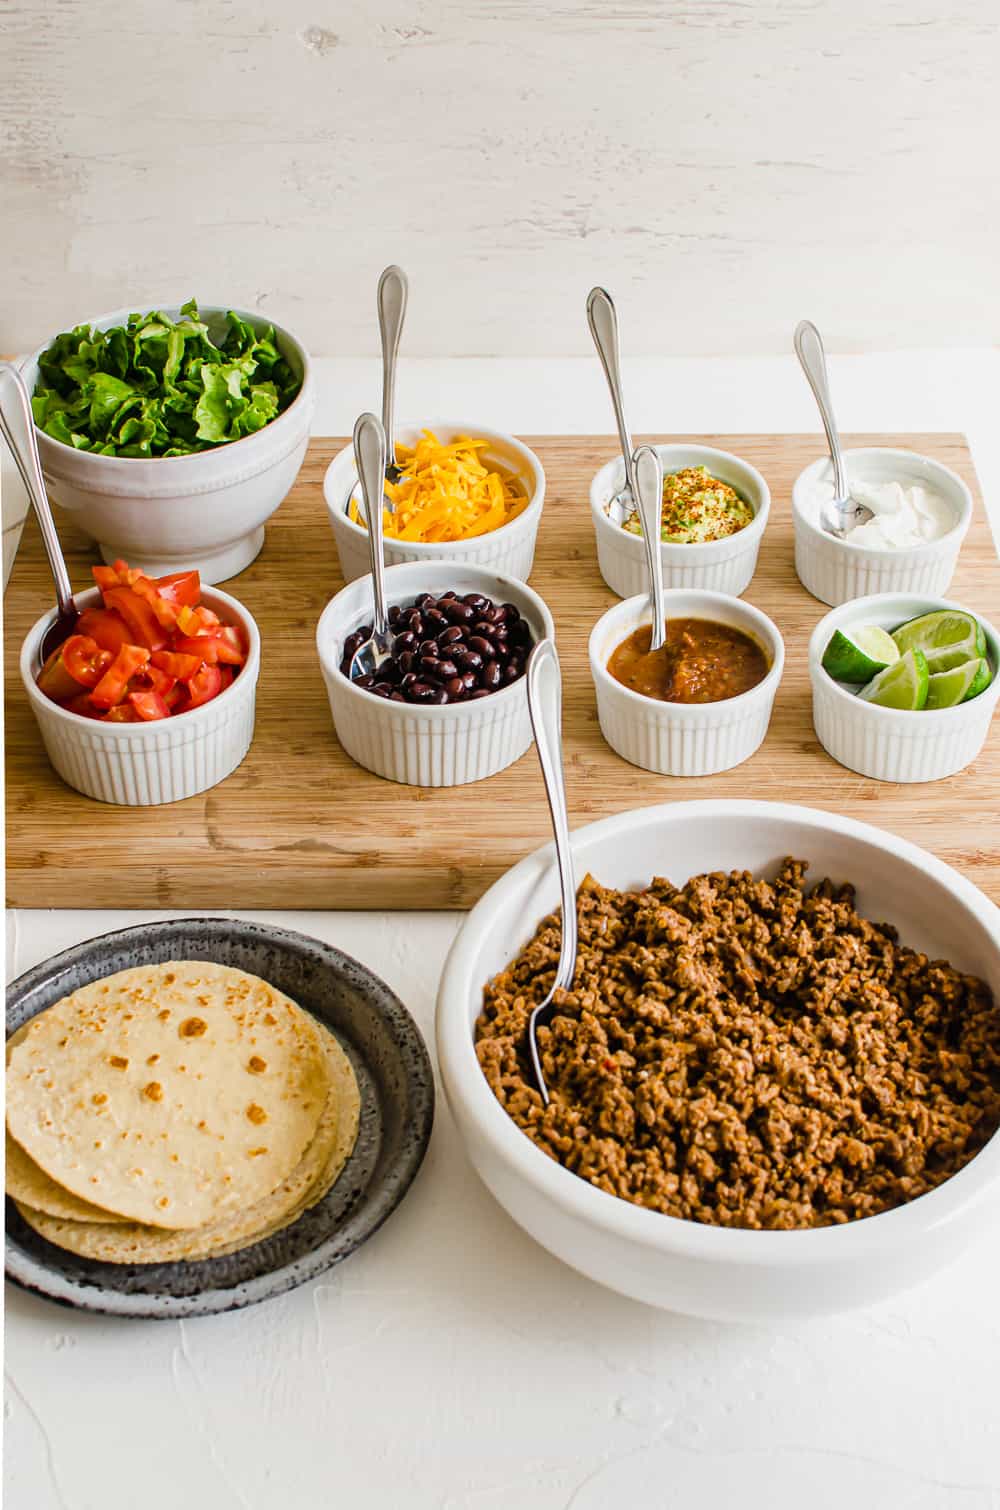 Ingredients set out in bowls for a taco bar.